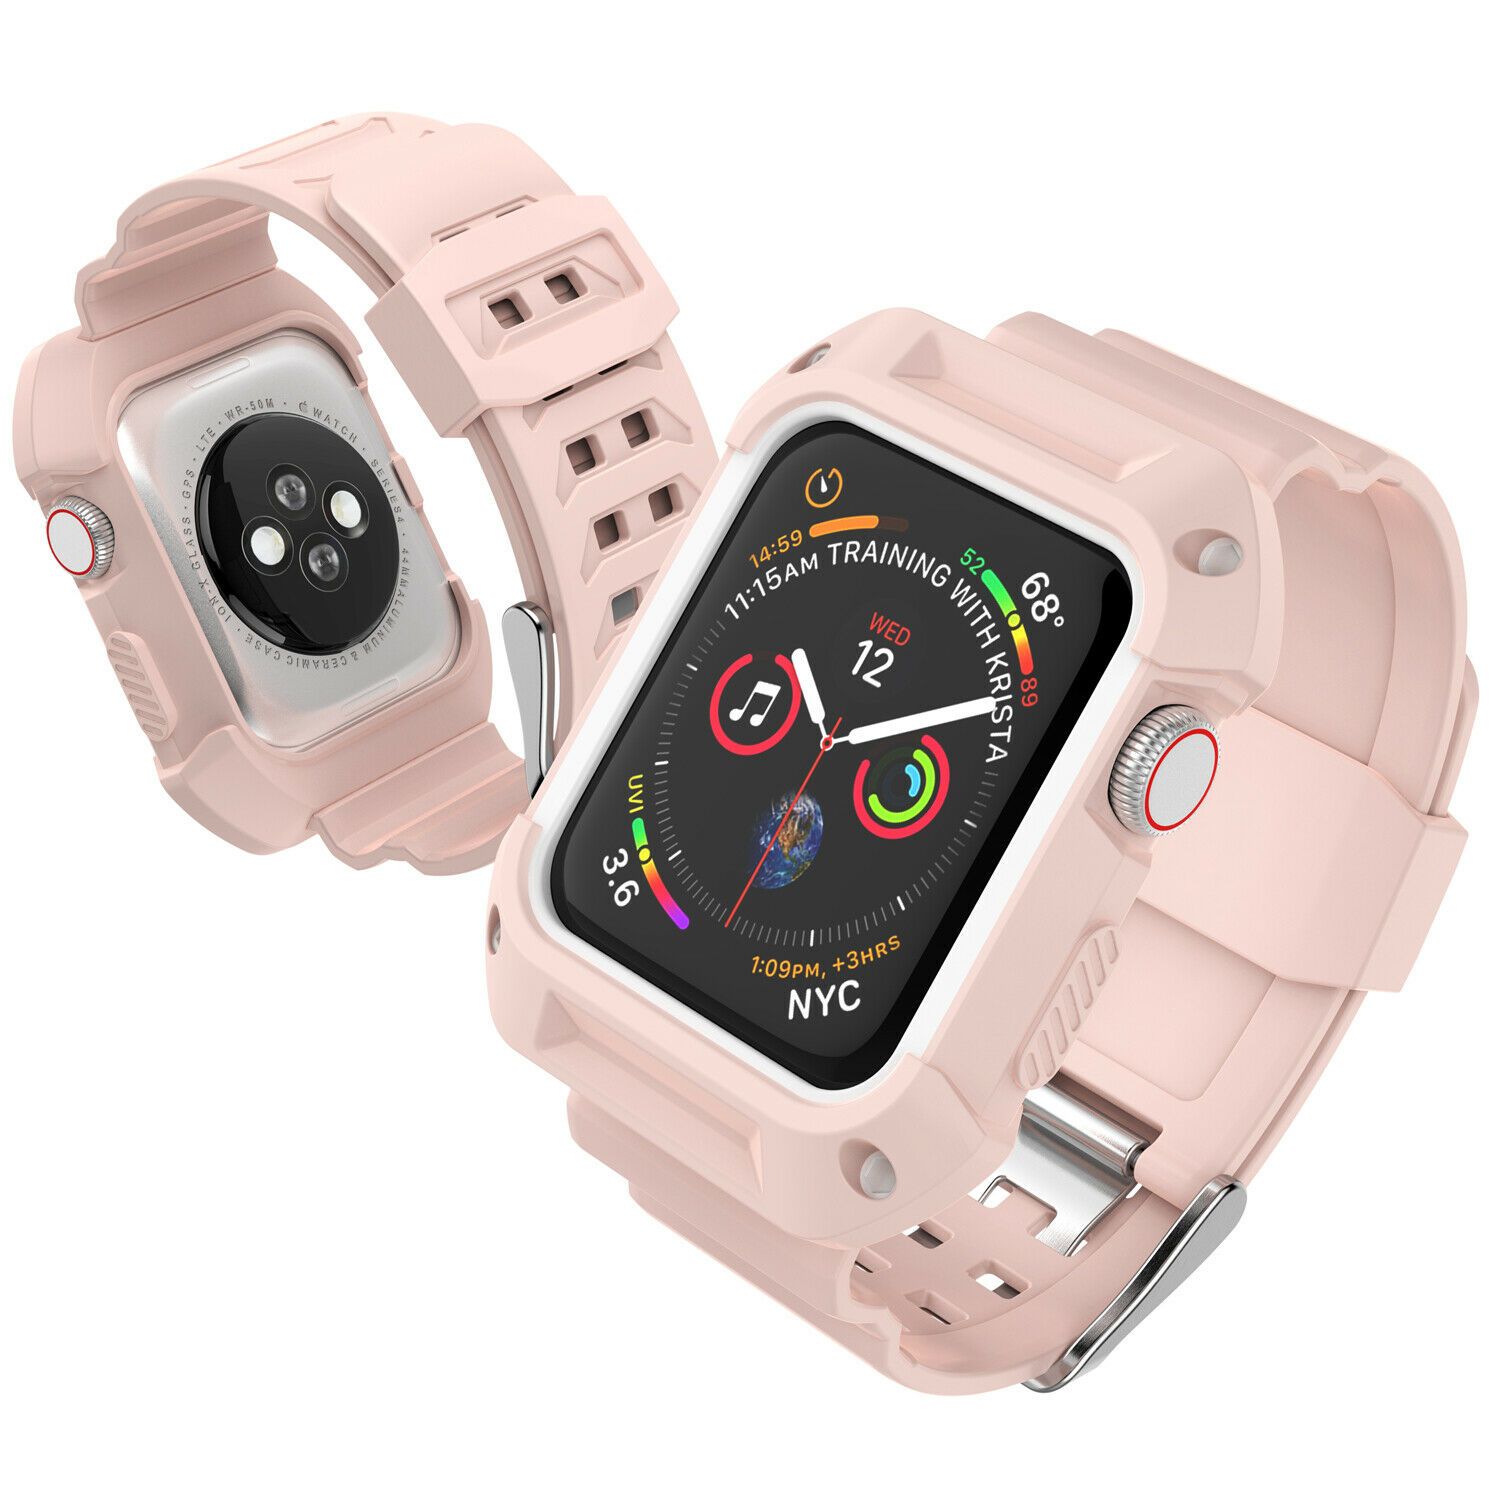 Silicone Sport Band Strap+Case for Apple Watch Series 5/4/3/2/1 42/38/40/44mm ebizware 38mm (Series 3/2/1) Baby Pink+White (Series 3/2/1) iwatch Band and Case